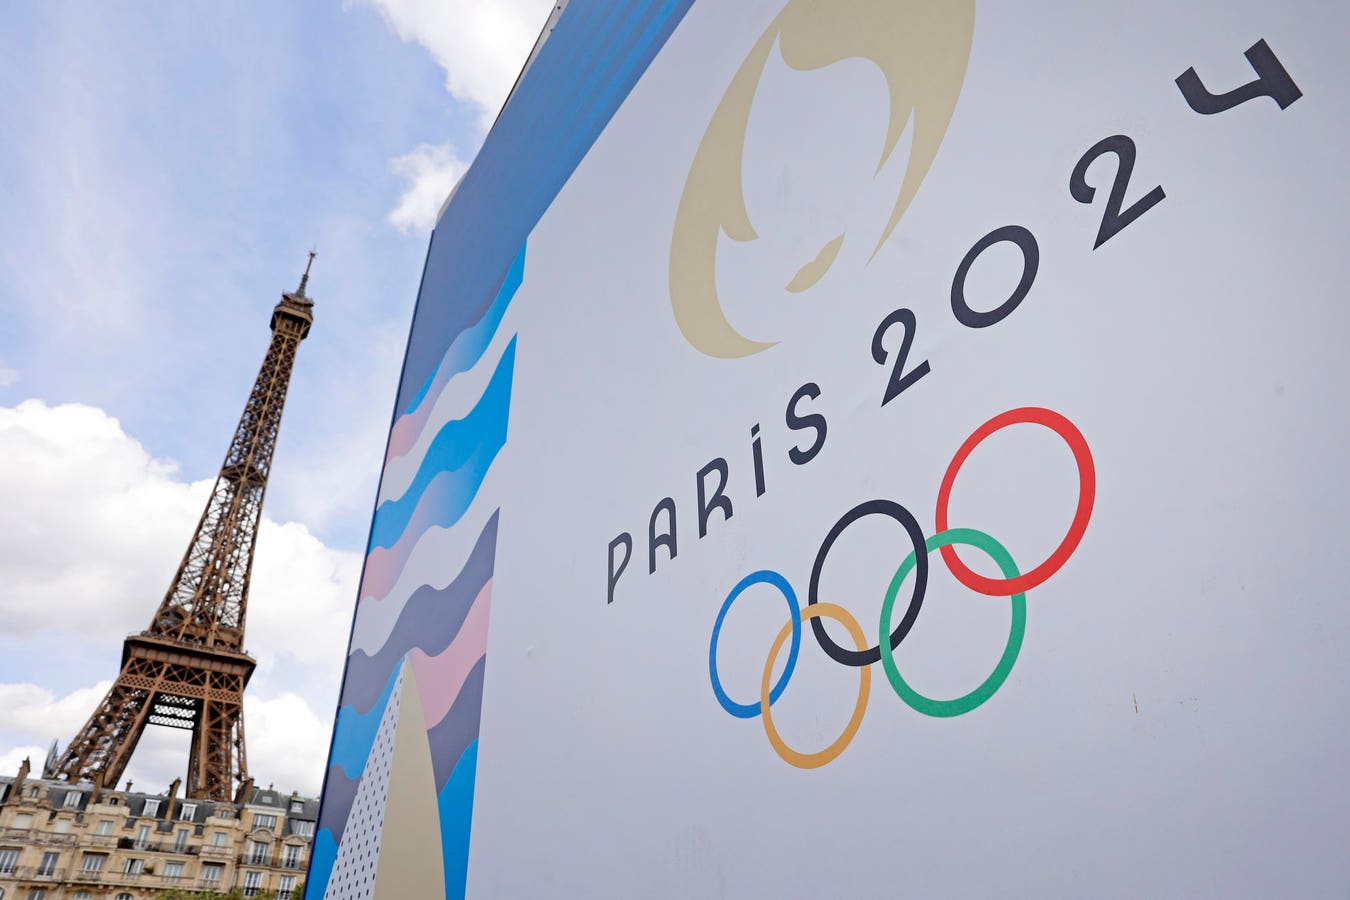 How To Watch The Paris Olympics 2024: Dates, Schedule And More